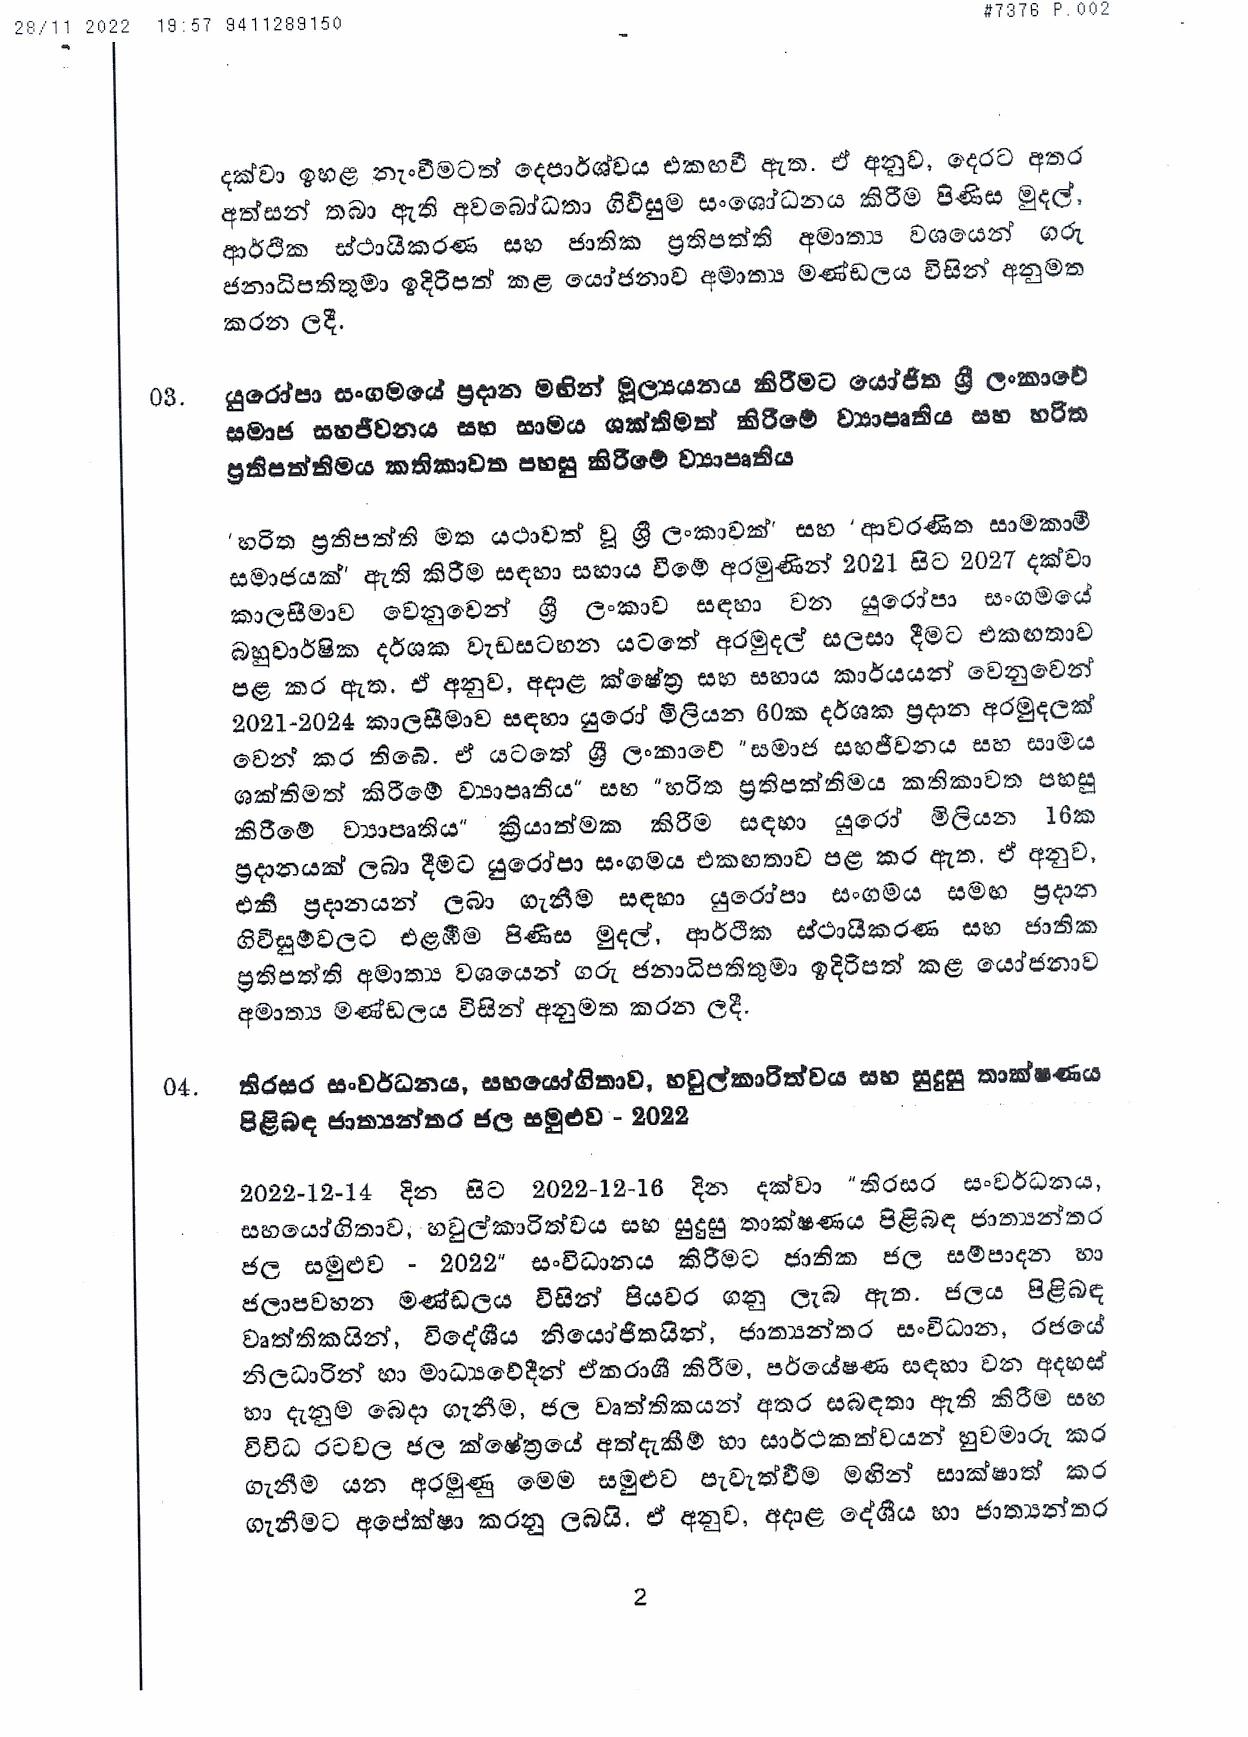 Cabinet Decision on 28.11.2022 page 002